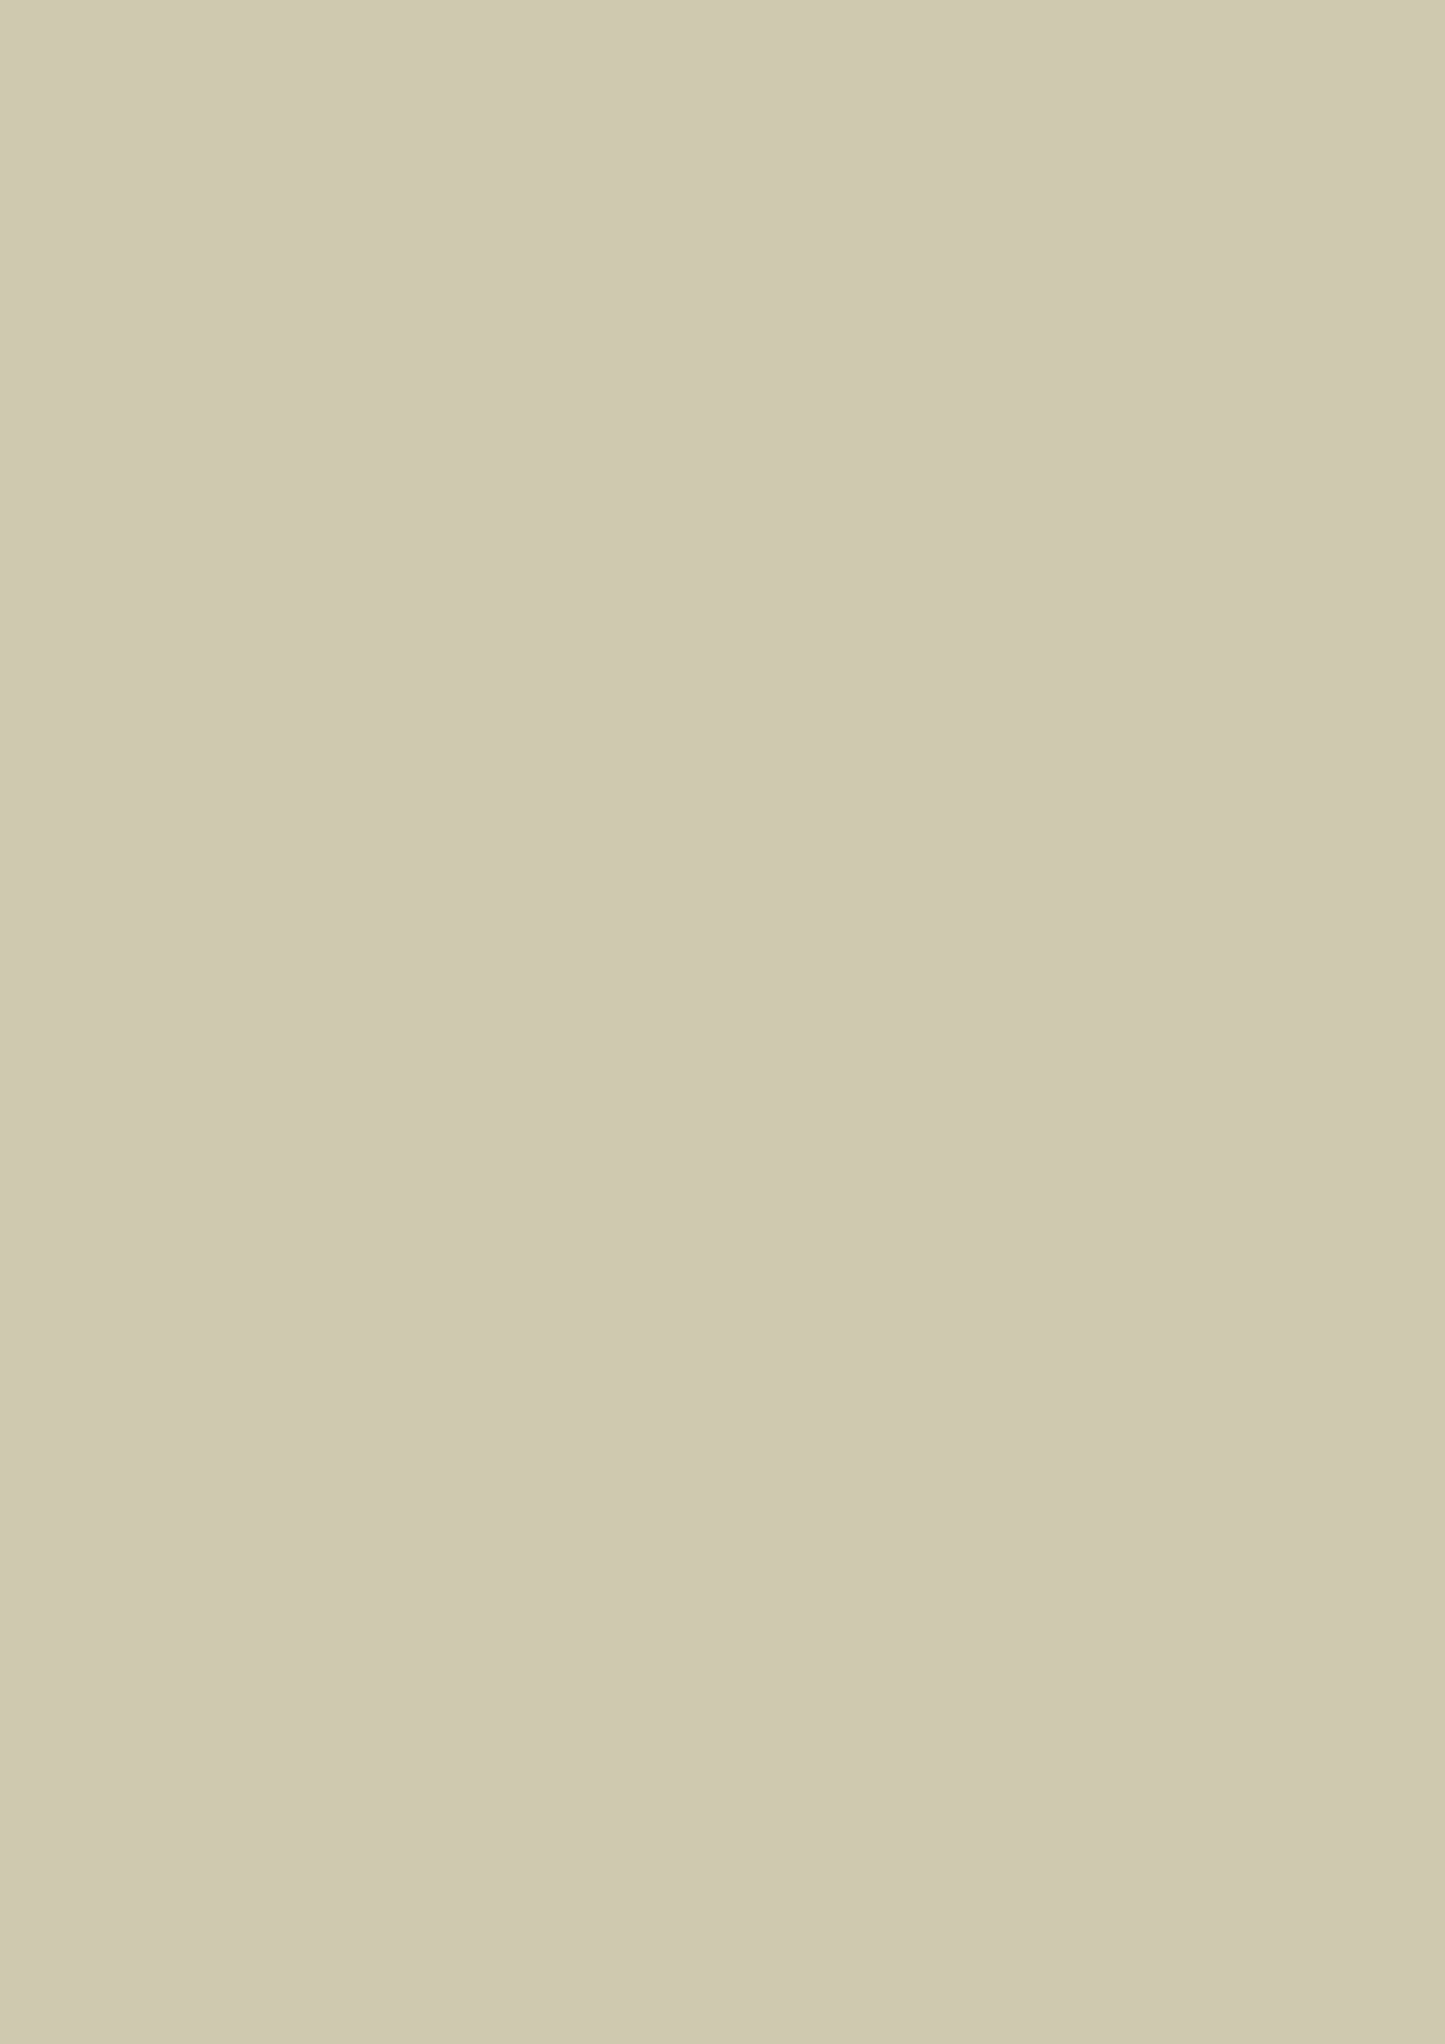 Dead Flat - Farrow and Ball - Old White 4 - Allround